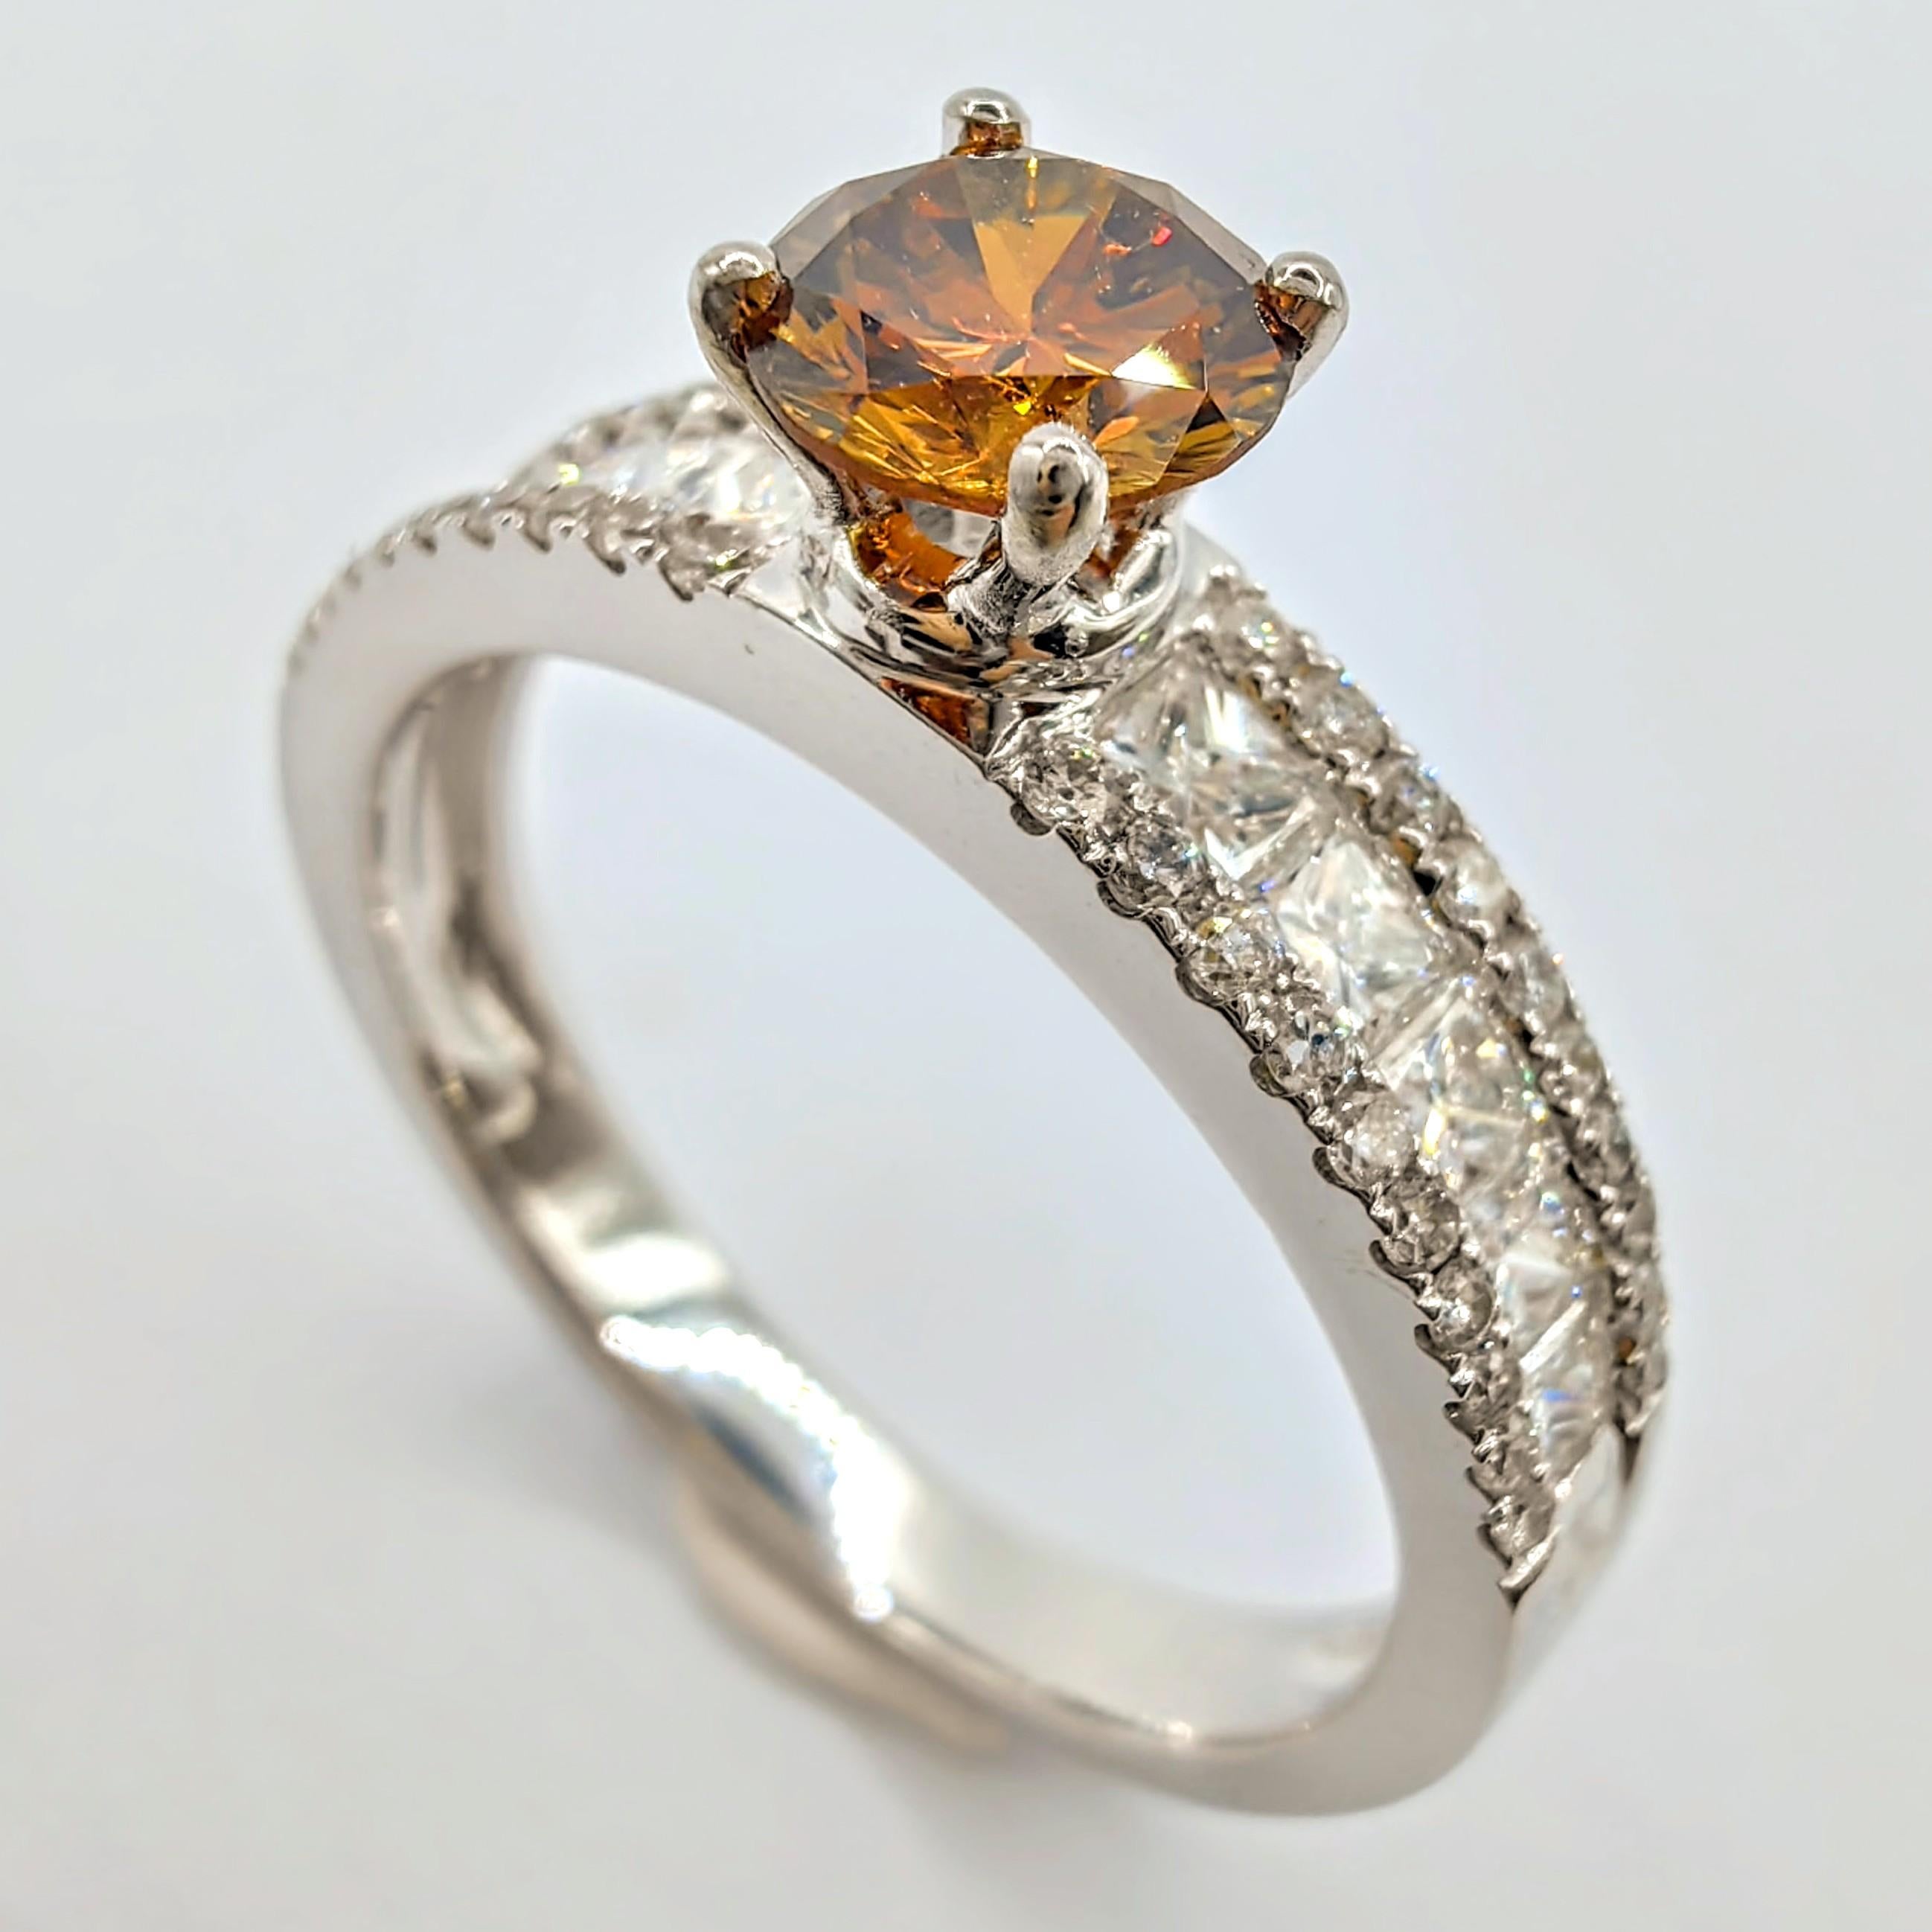 Introducing our exquisite GIA Certified .51 Carat Fancy Deep Orange-Brown Diamond Ring in 18K White Gold, a true masterpiece that exudes elegance and sophistication.

At the center of this ring is a stunning round brilliant cut fancy deep